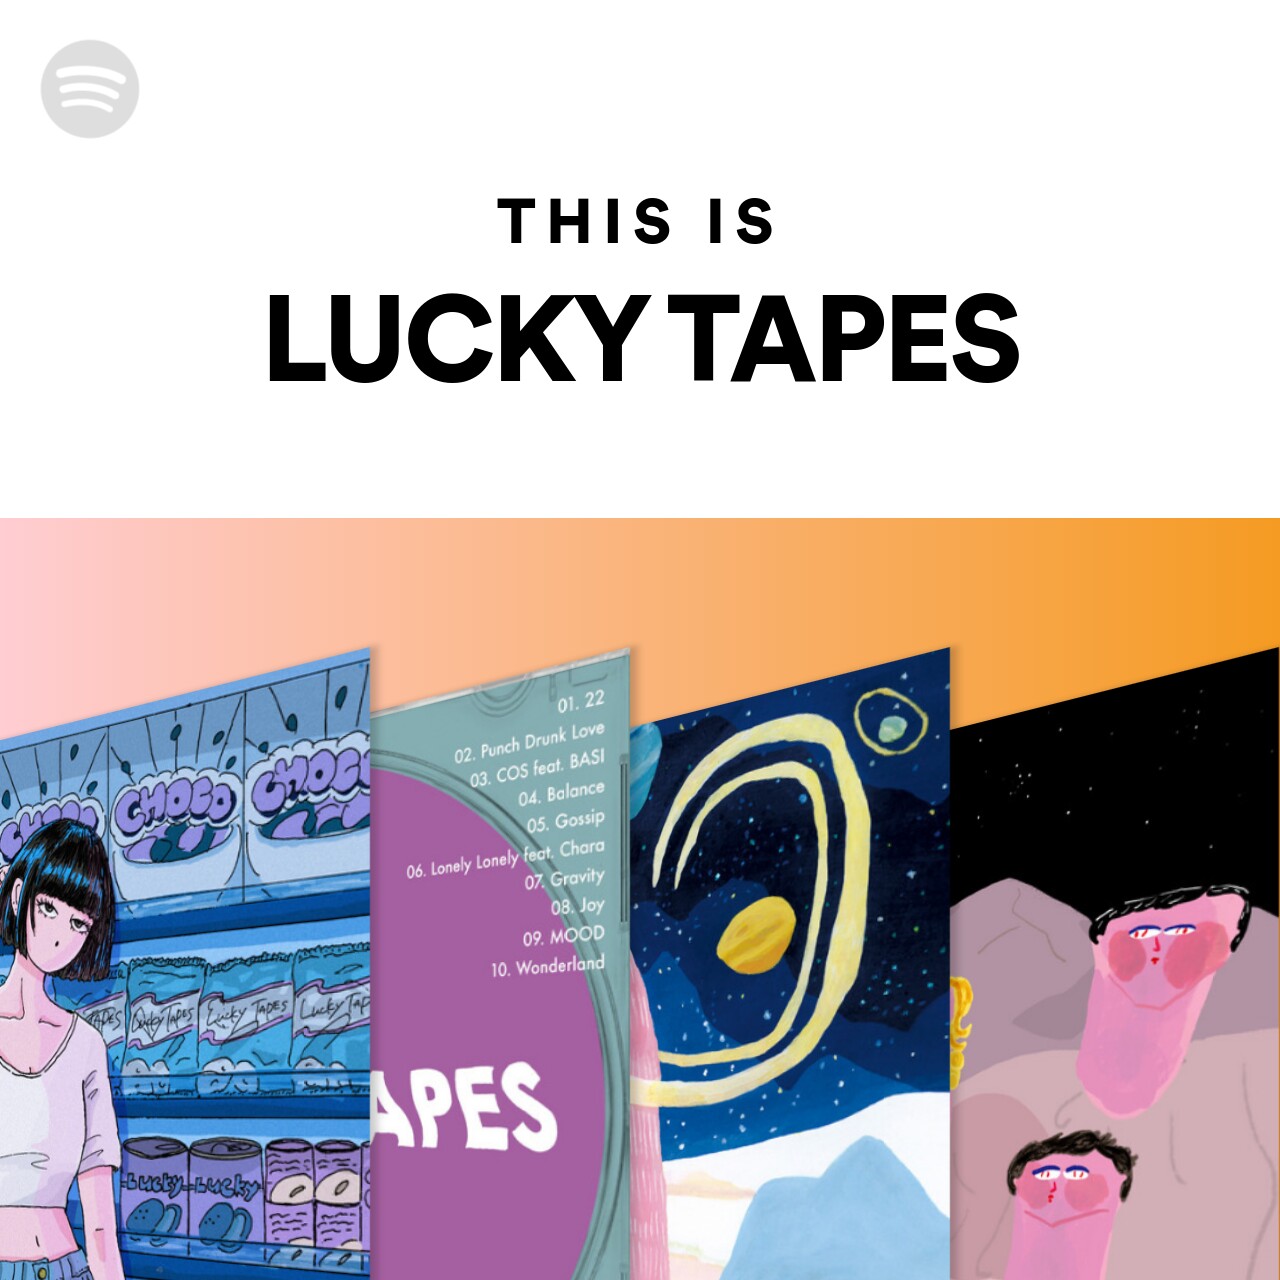 This Is LUCKY TAPES